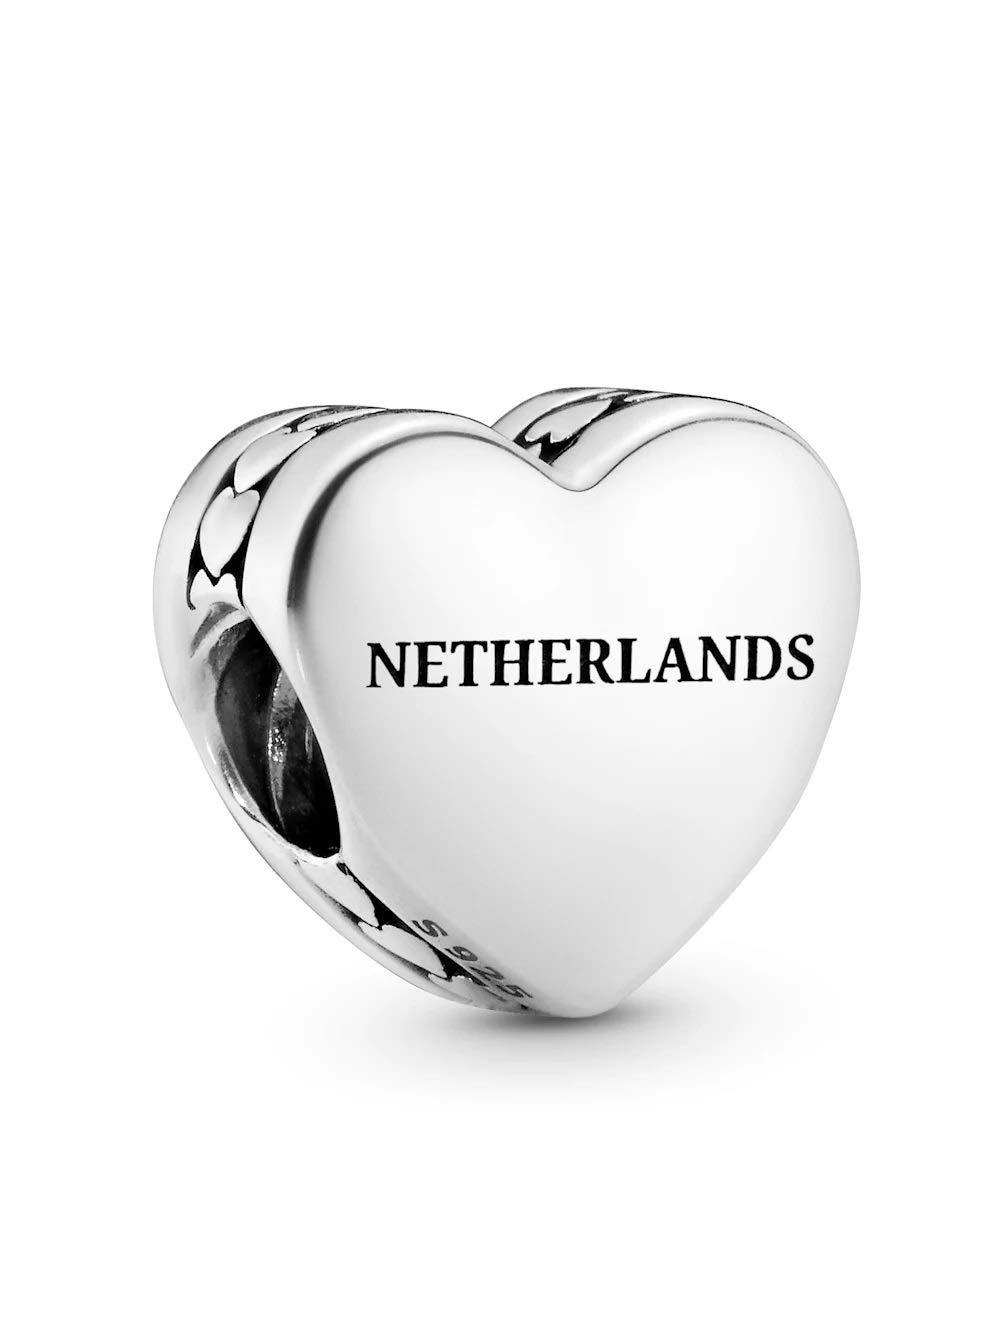 PANDORA Heart Charm With Netherlands Lettering And Tulip Made Of Sterling  Silver in Metallic - Lyst